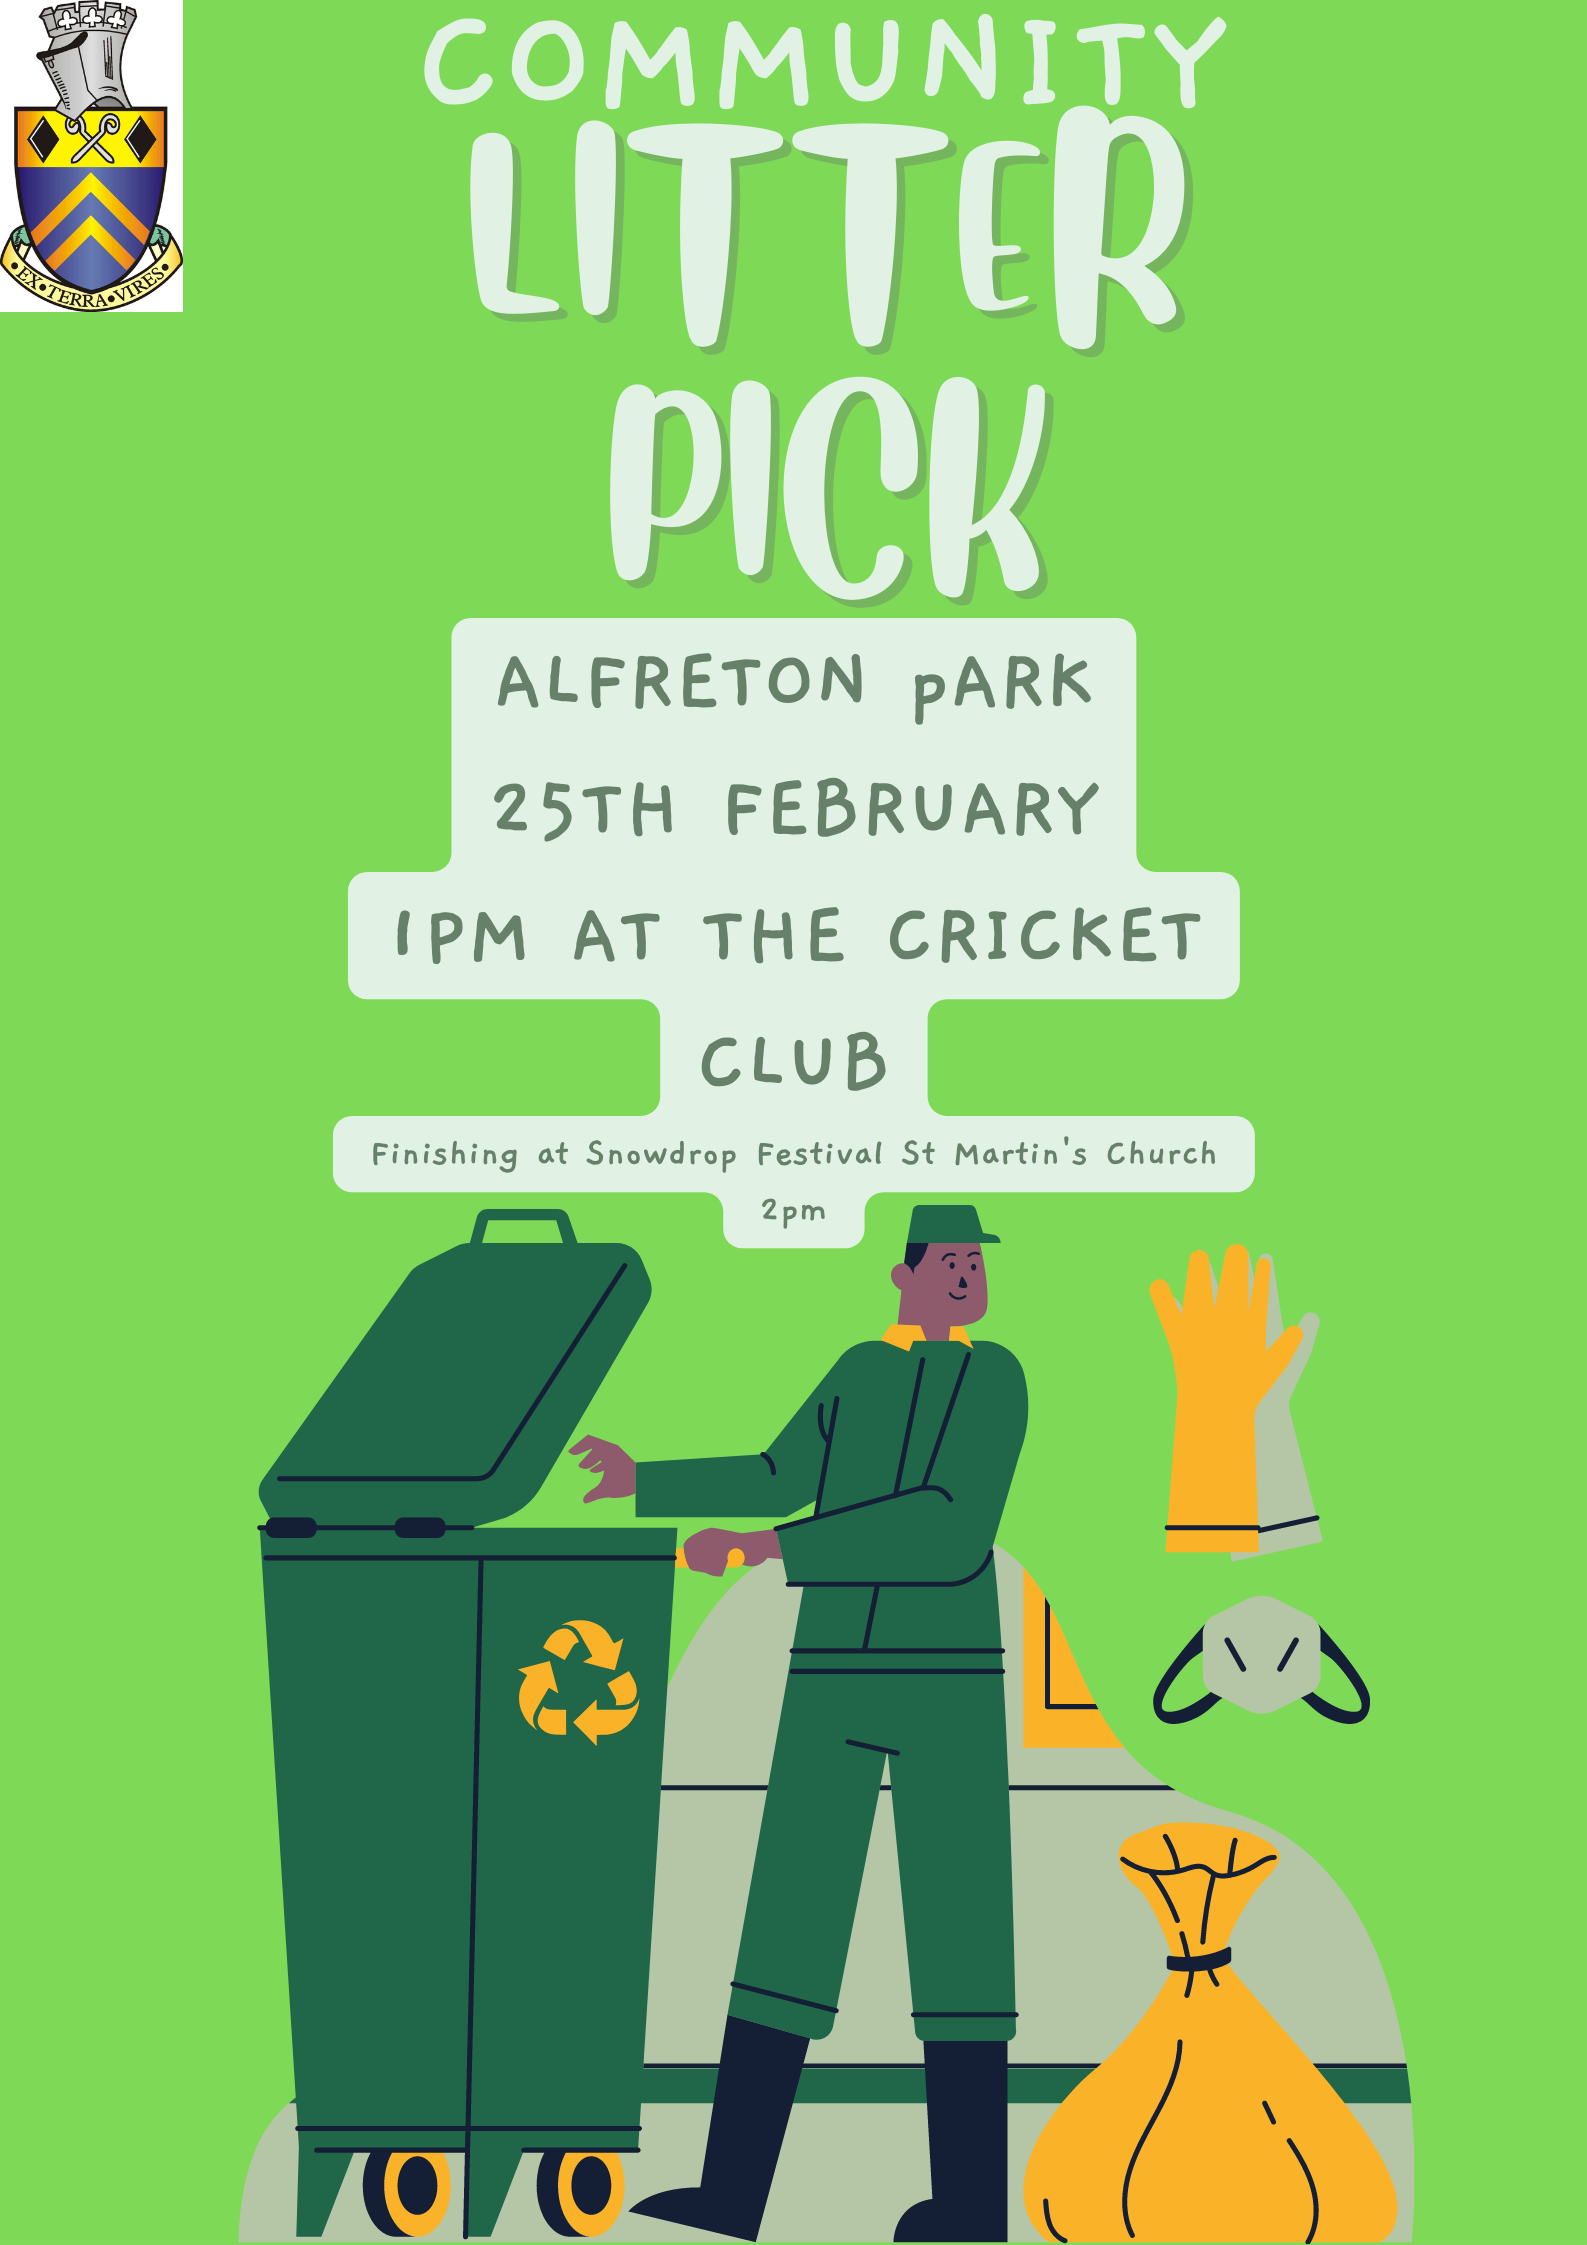 A community litter pick will take place in Alfreton Park